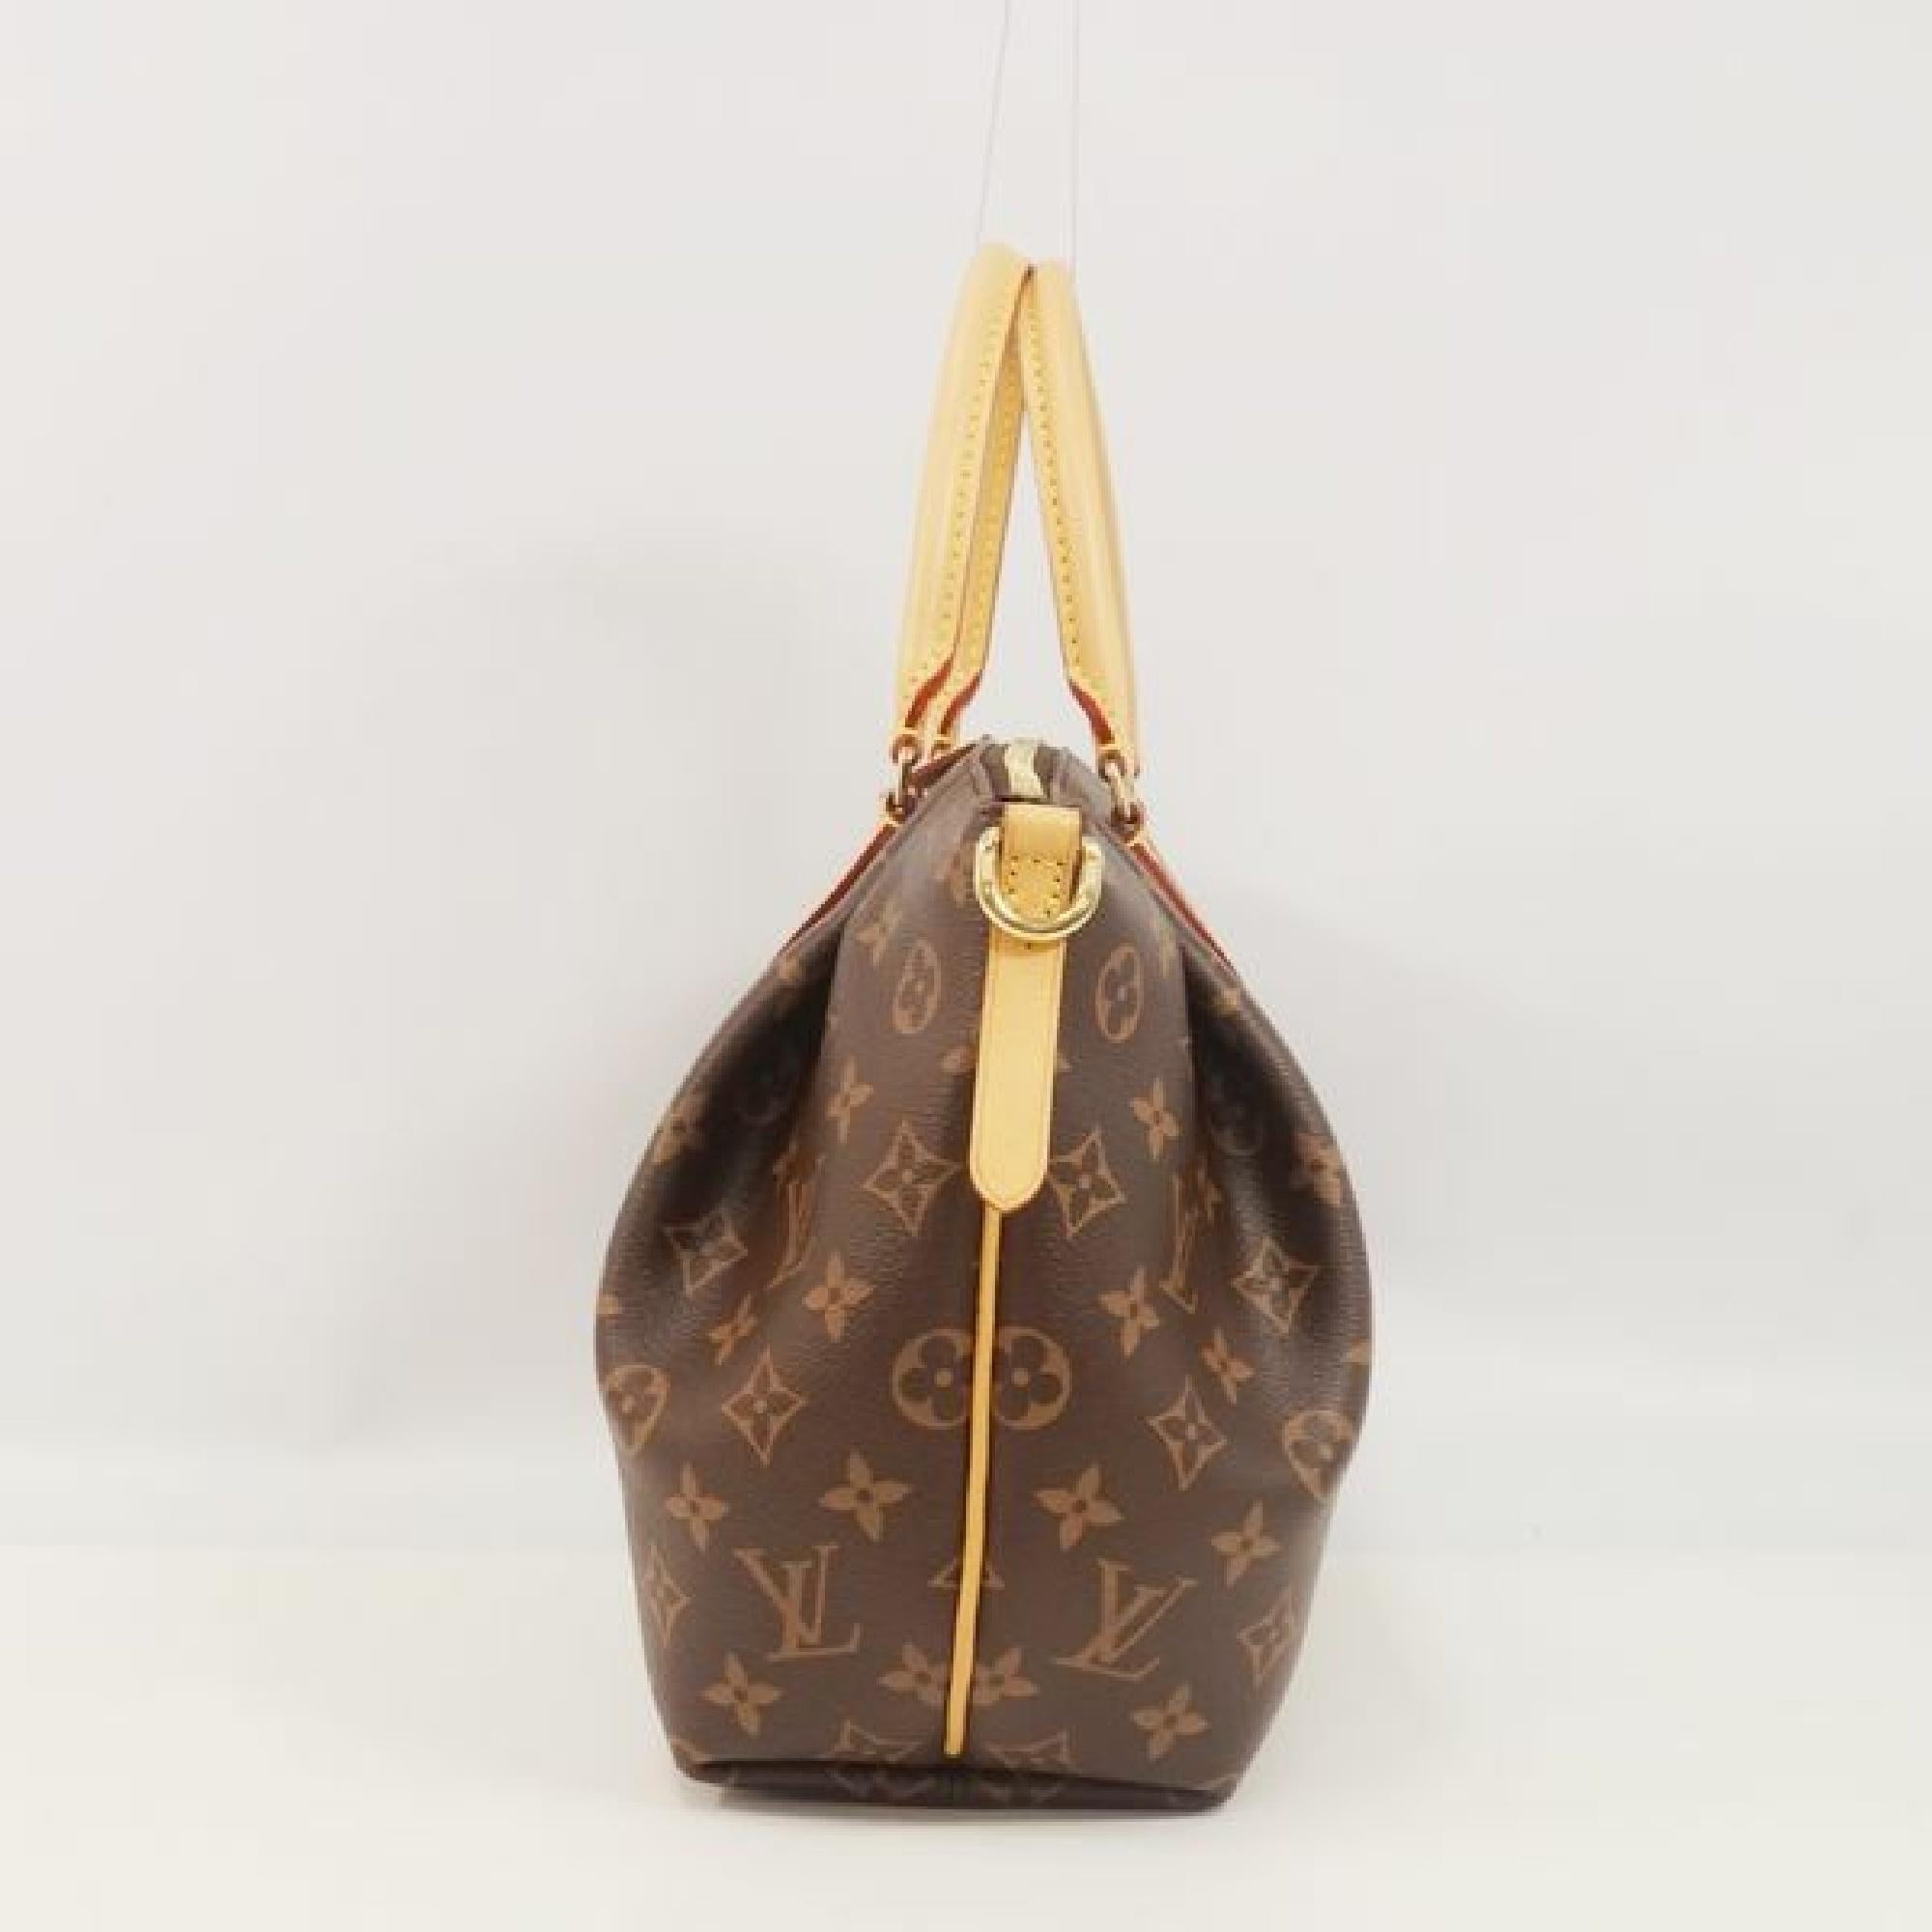 An authentic TurennePM  Womens  handbag M48813 The outside material is Monogram canvas. The pattern is TurennePM. This item is Contemporary. The year of manufacture would be 2016.
Rank
A beauty goods
There is little bit signs of wear, but overall